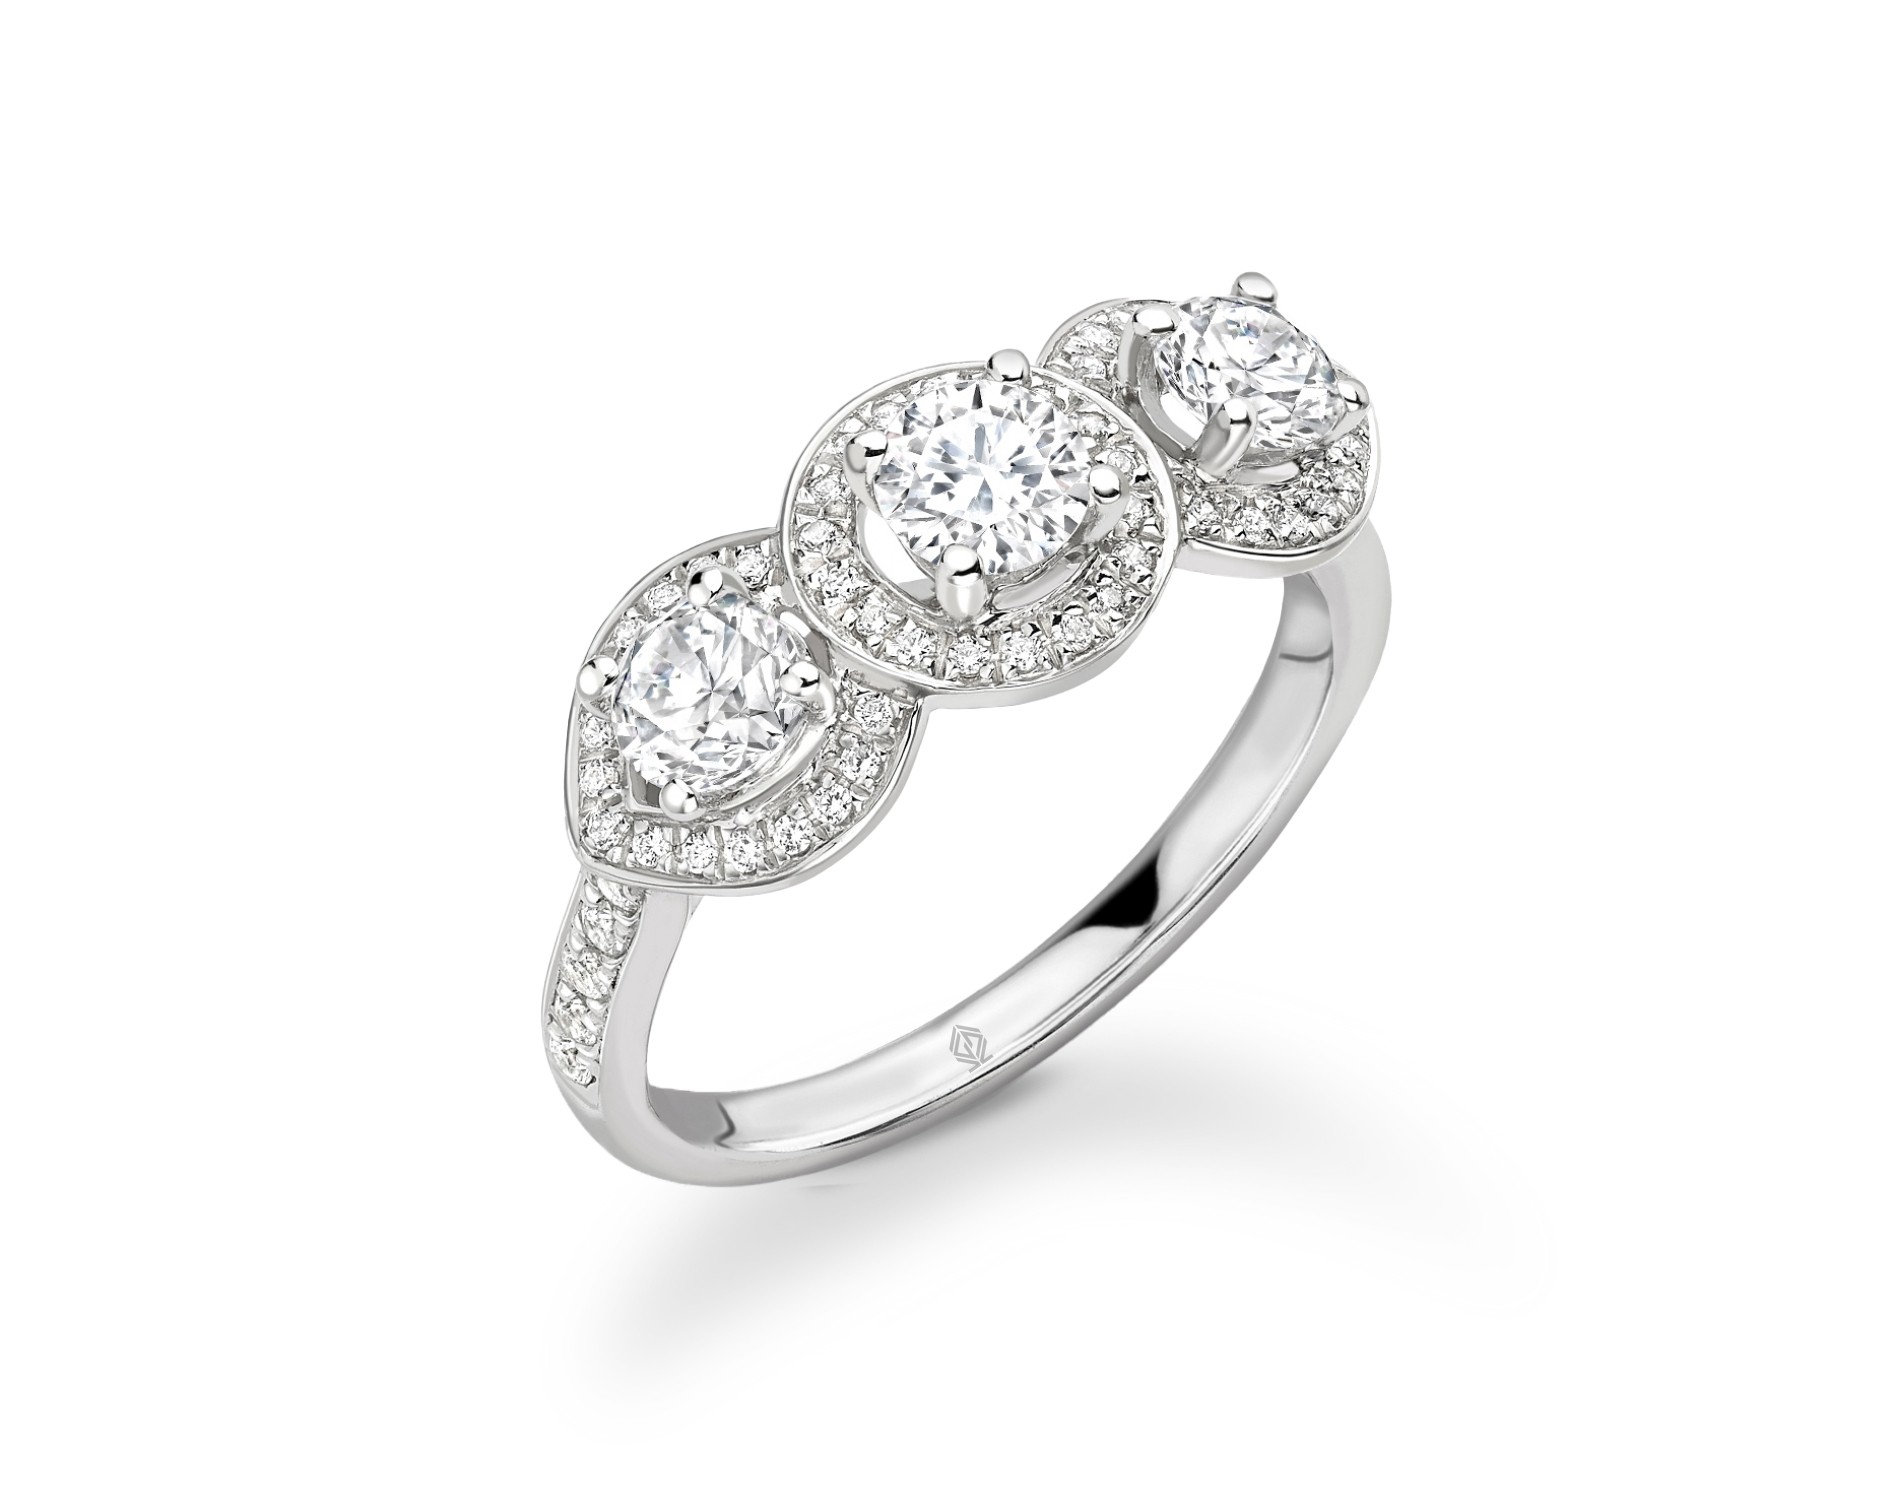 18K WHITE GOLD HALO ROUND CUT TRILOGY DIAMOND ENGAGEMENT RING WITH SIDE DIAMONDS CHANNEL SET